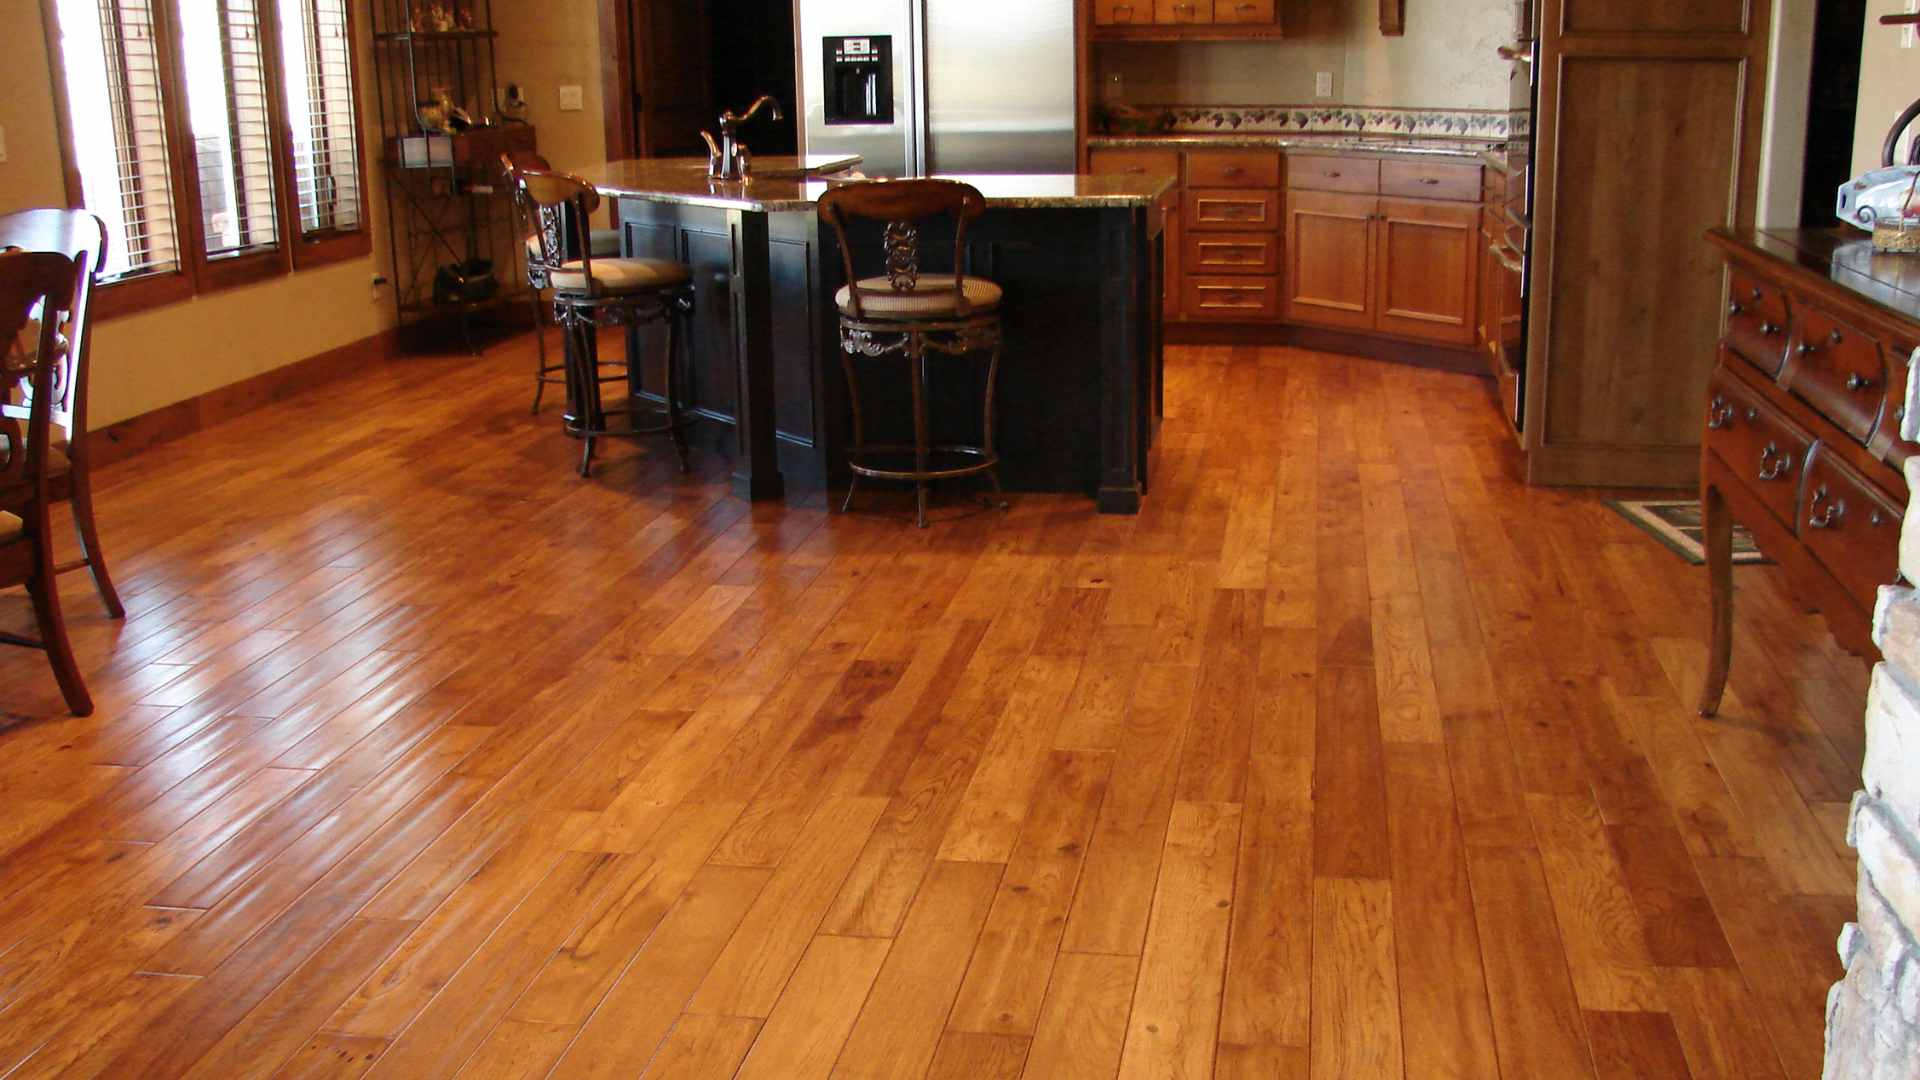 wood-look laminate flooring in kitchen with wood panelling